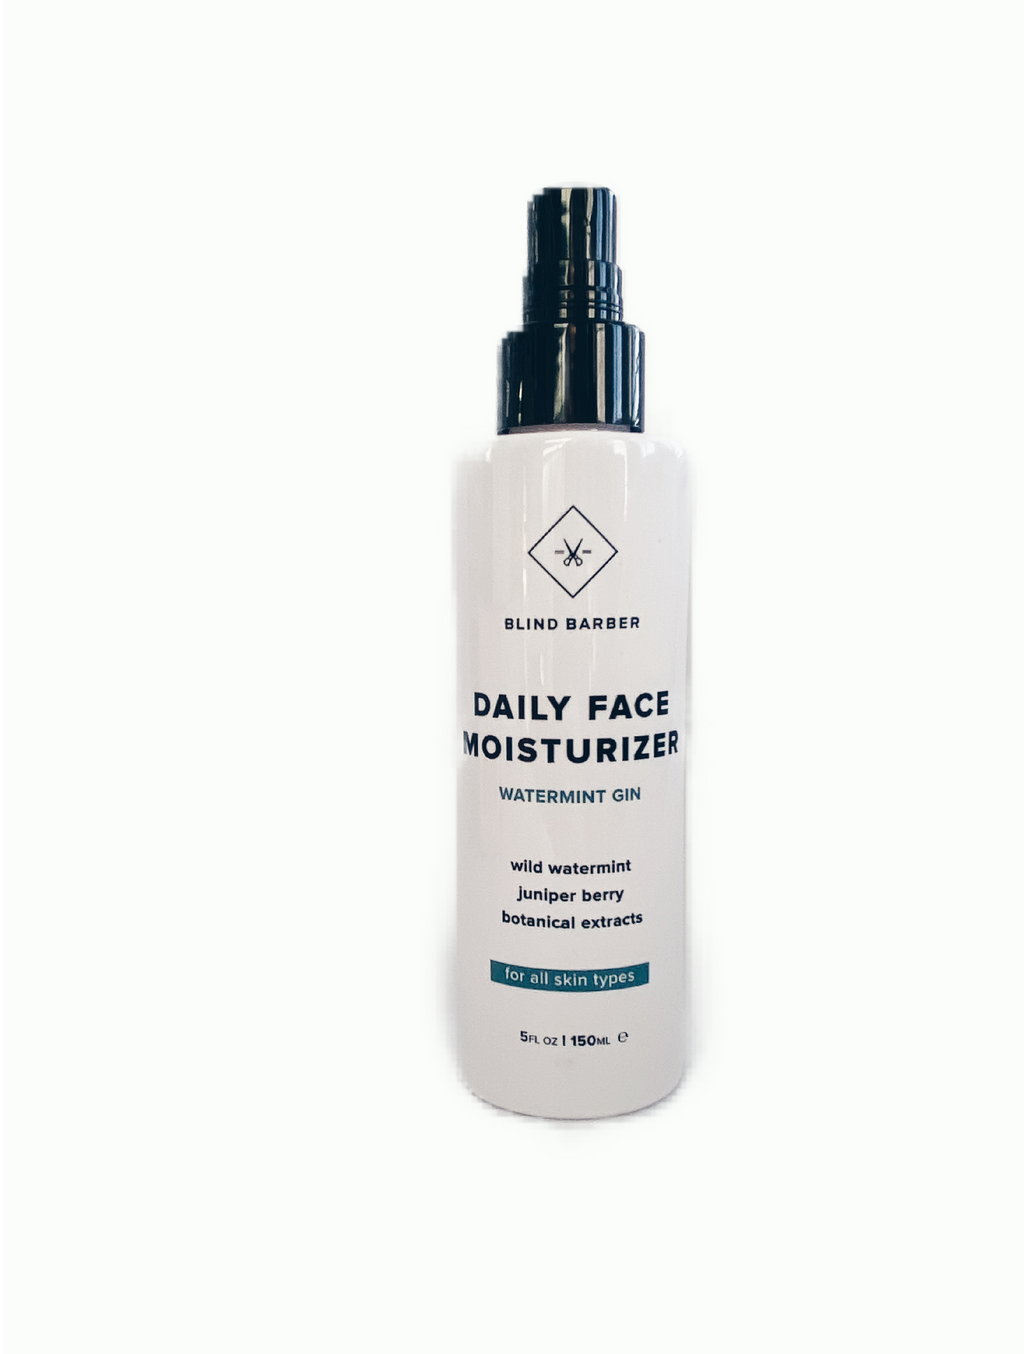 BLIND BARBER Daily Face Moisturizer in Watermint Gin